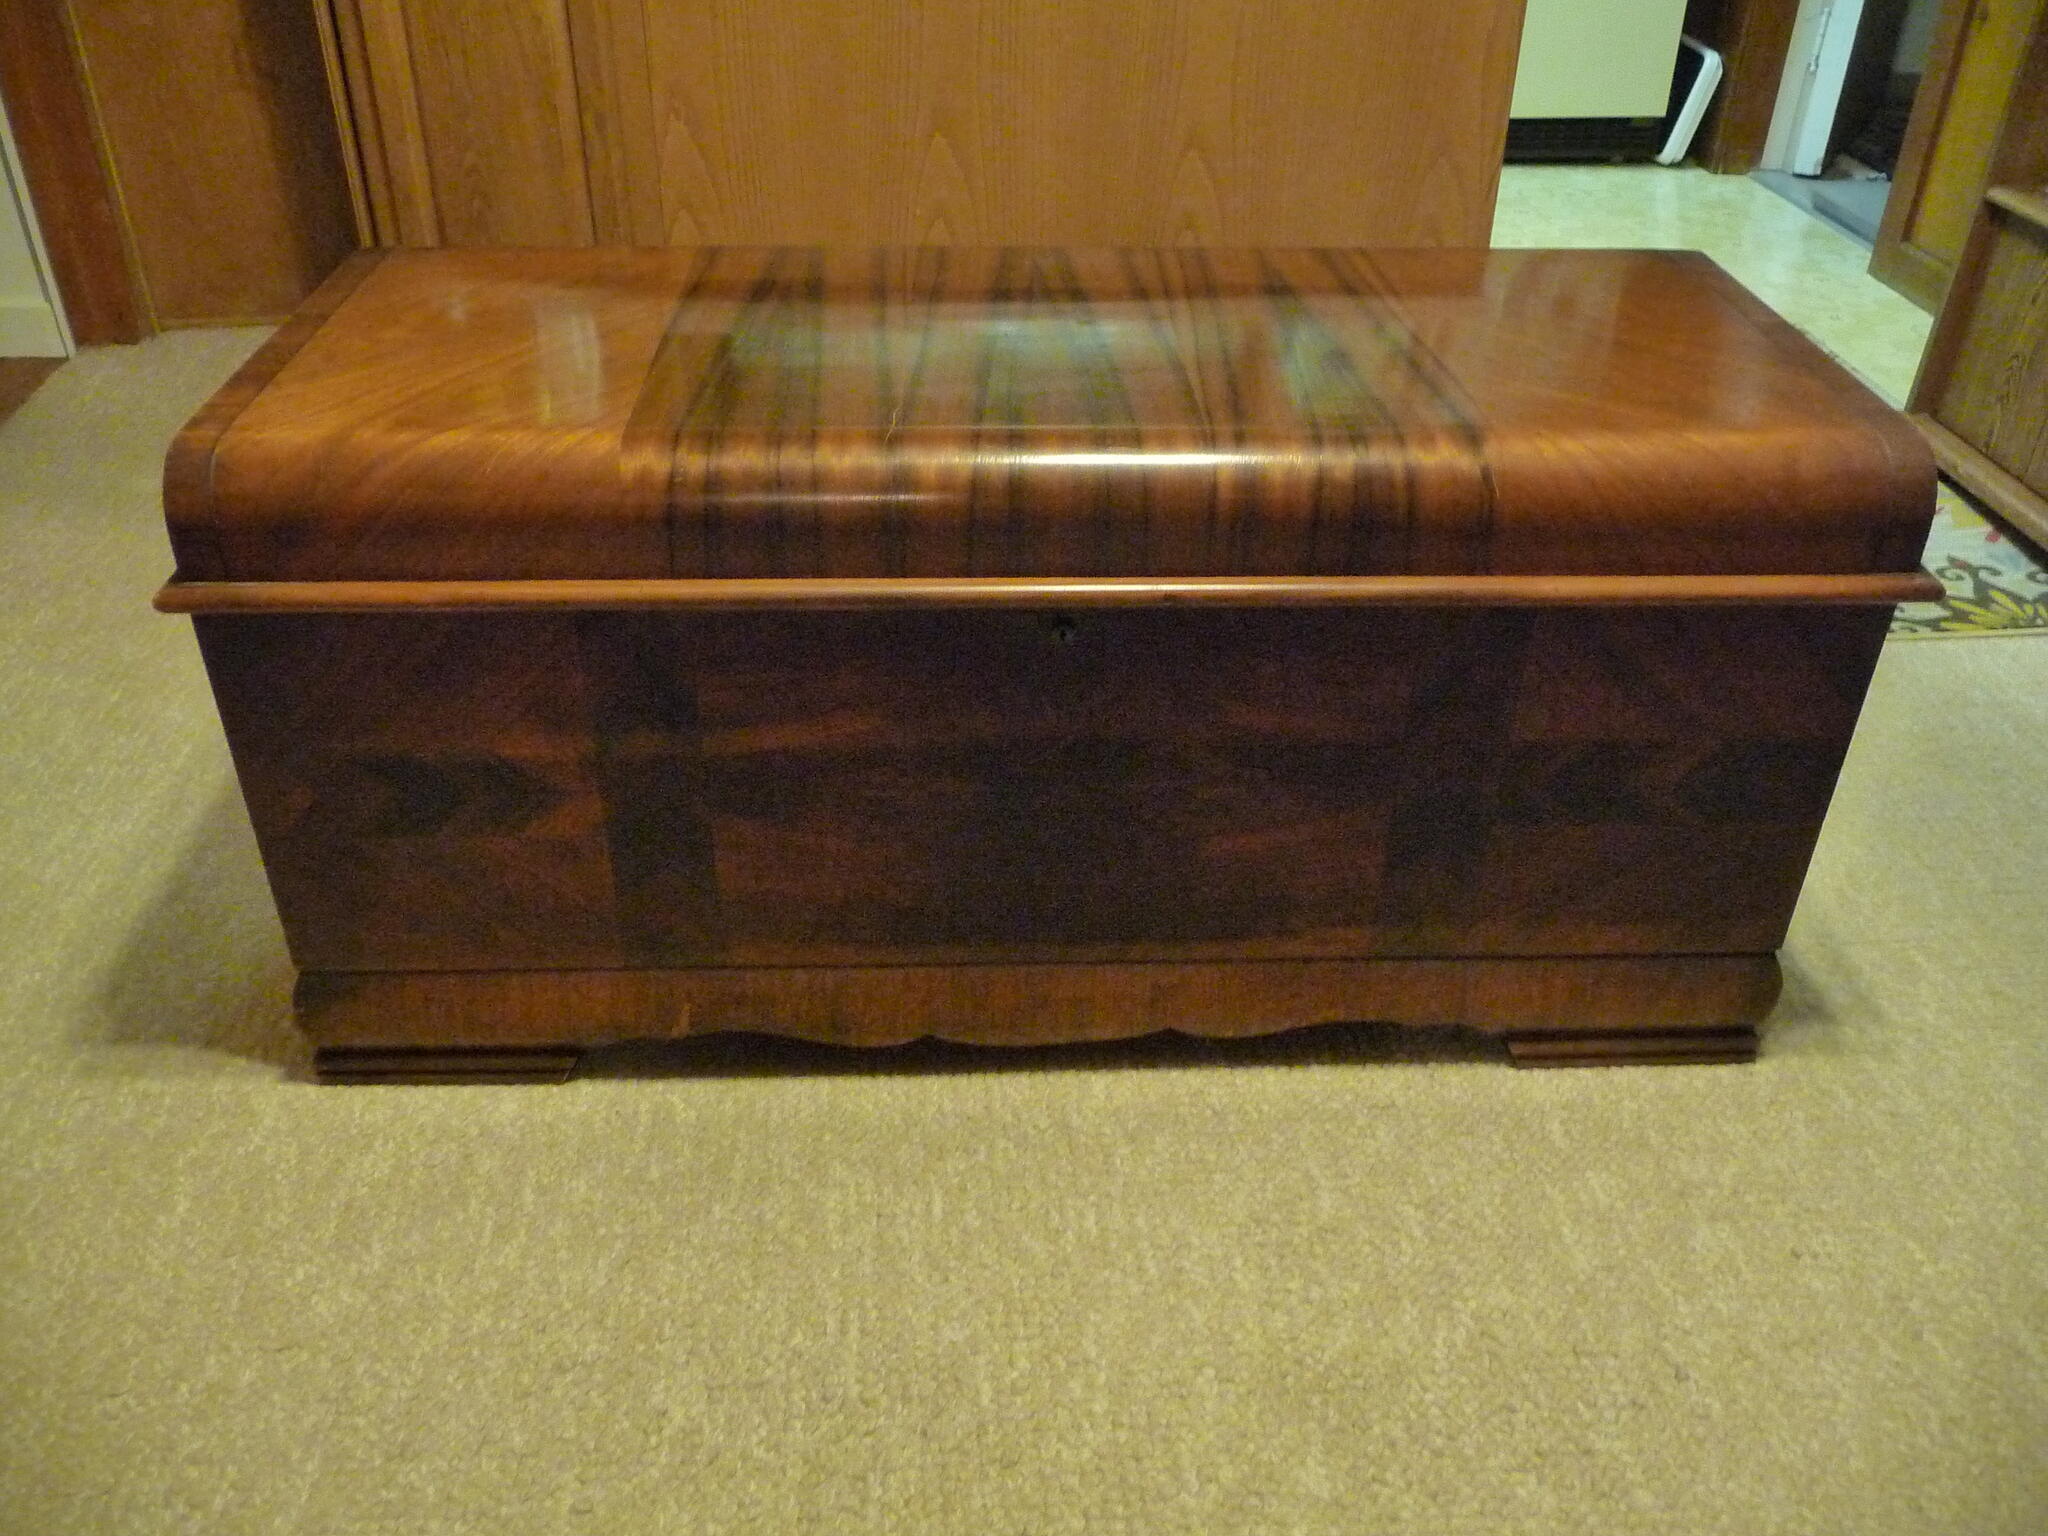 1948 Lane Cedar Chest/Hope Chest With Tags For $295 In Fort Wayne, IN For Sale and Free — Nextdoor picture image